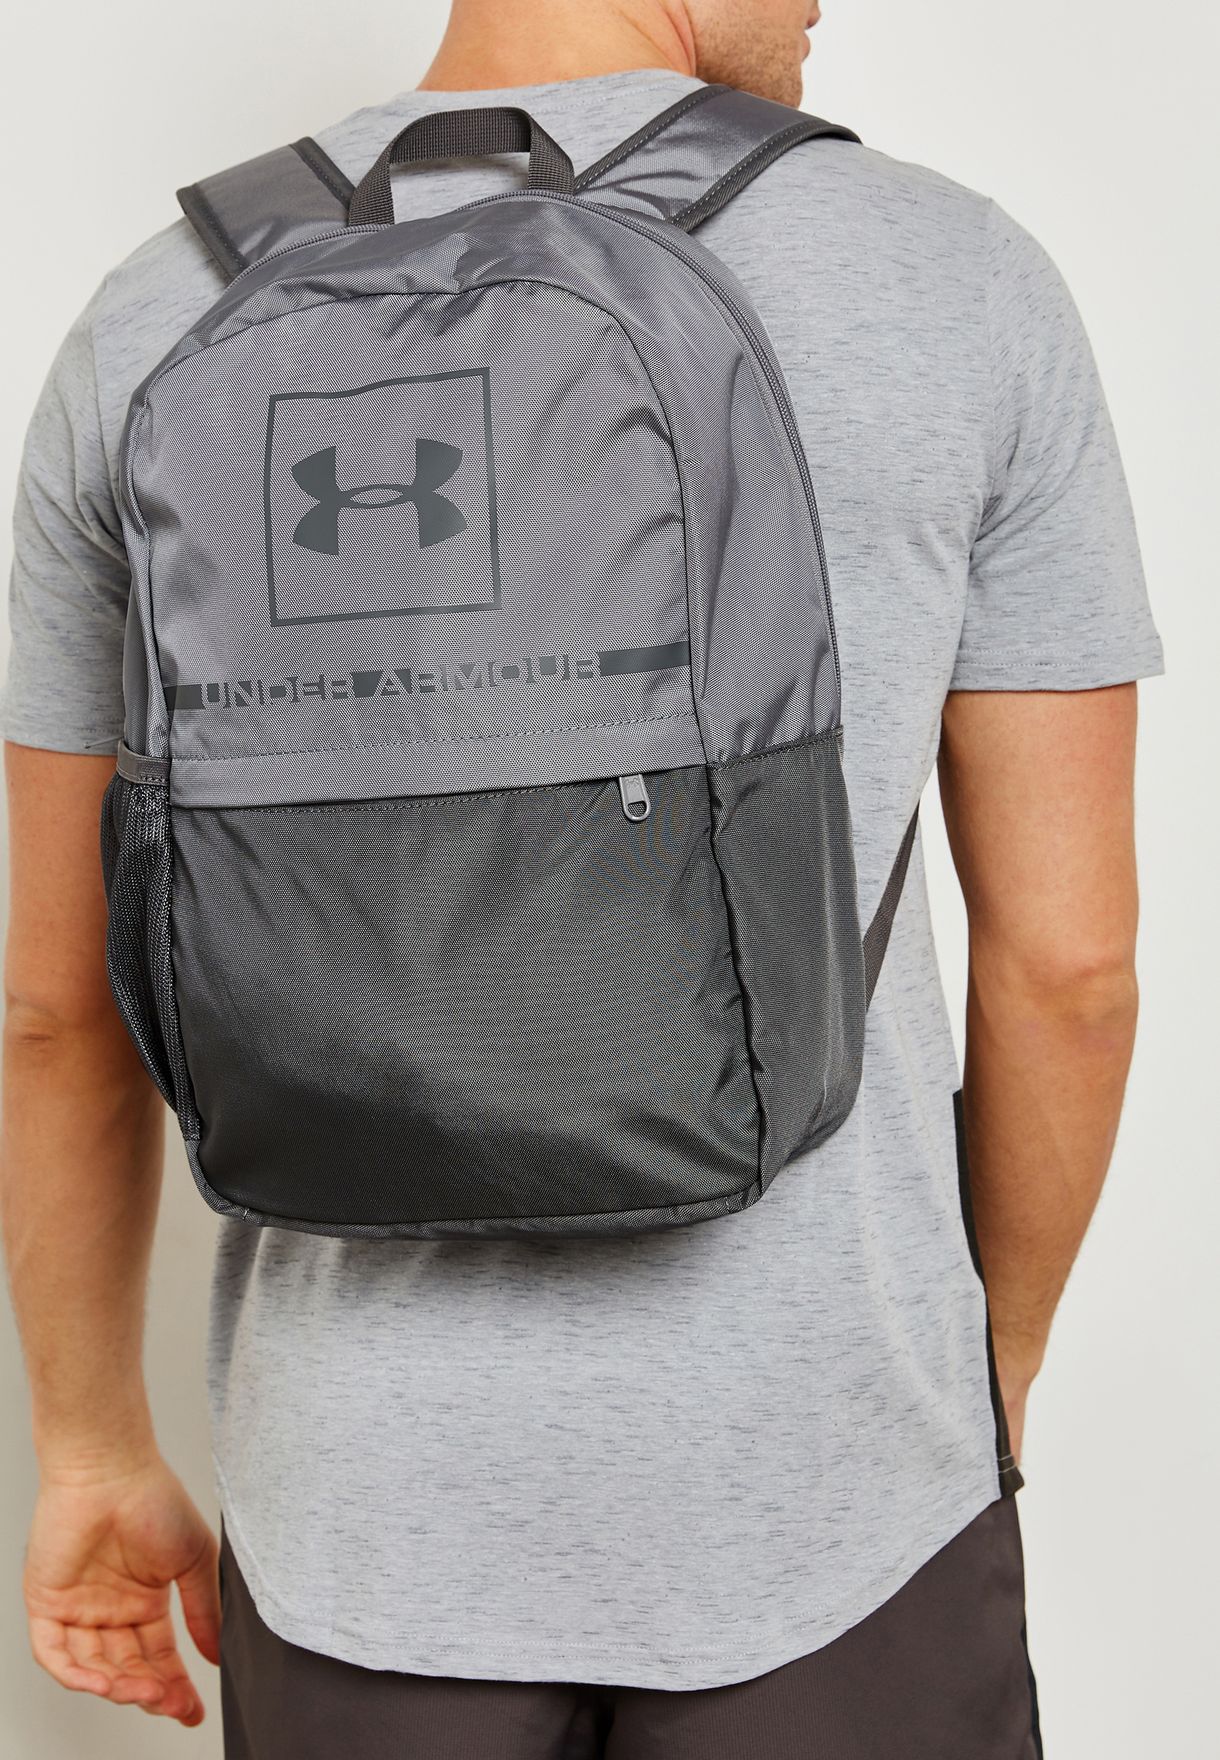 Buy Under Armour grey Project 5 